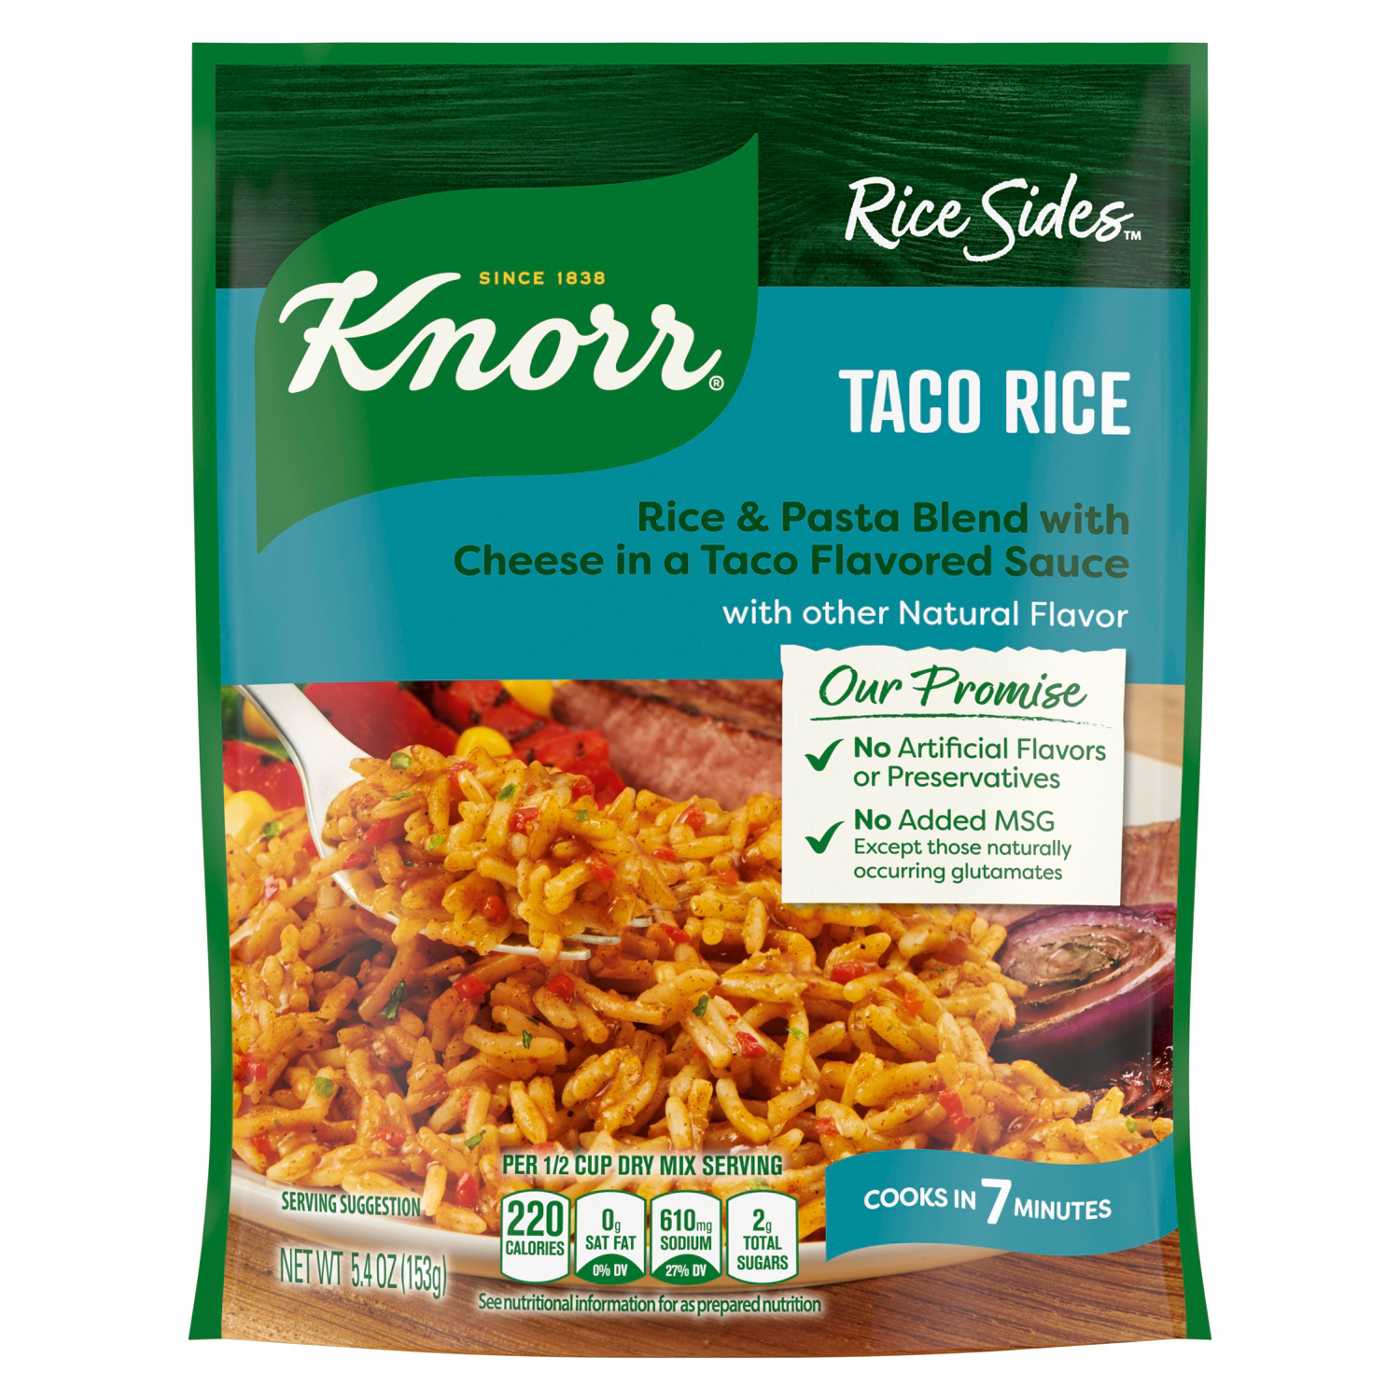 Knorr Rice Sides Taco Rice; image 1 of 3